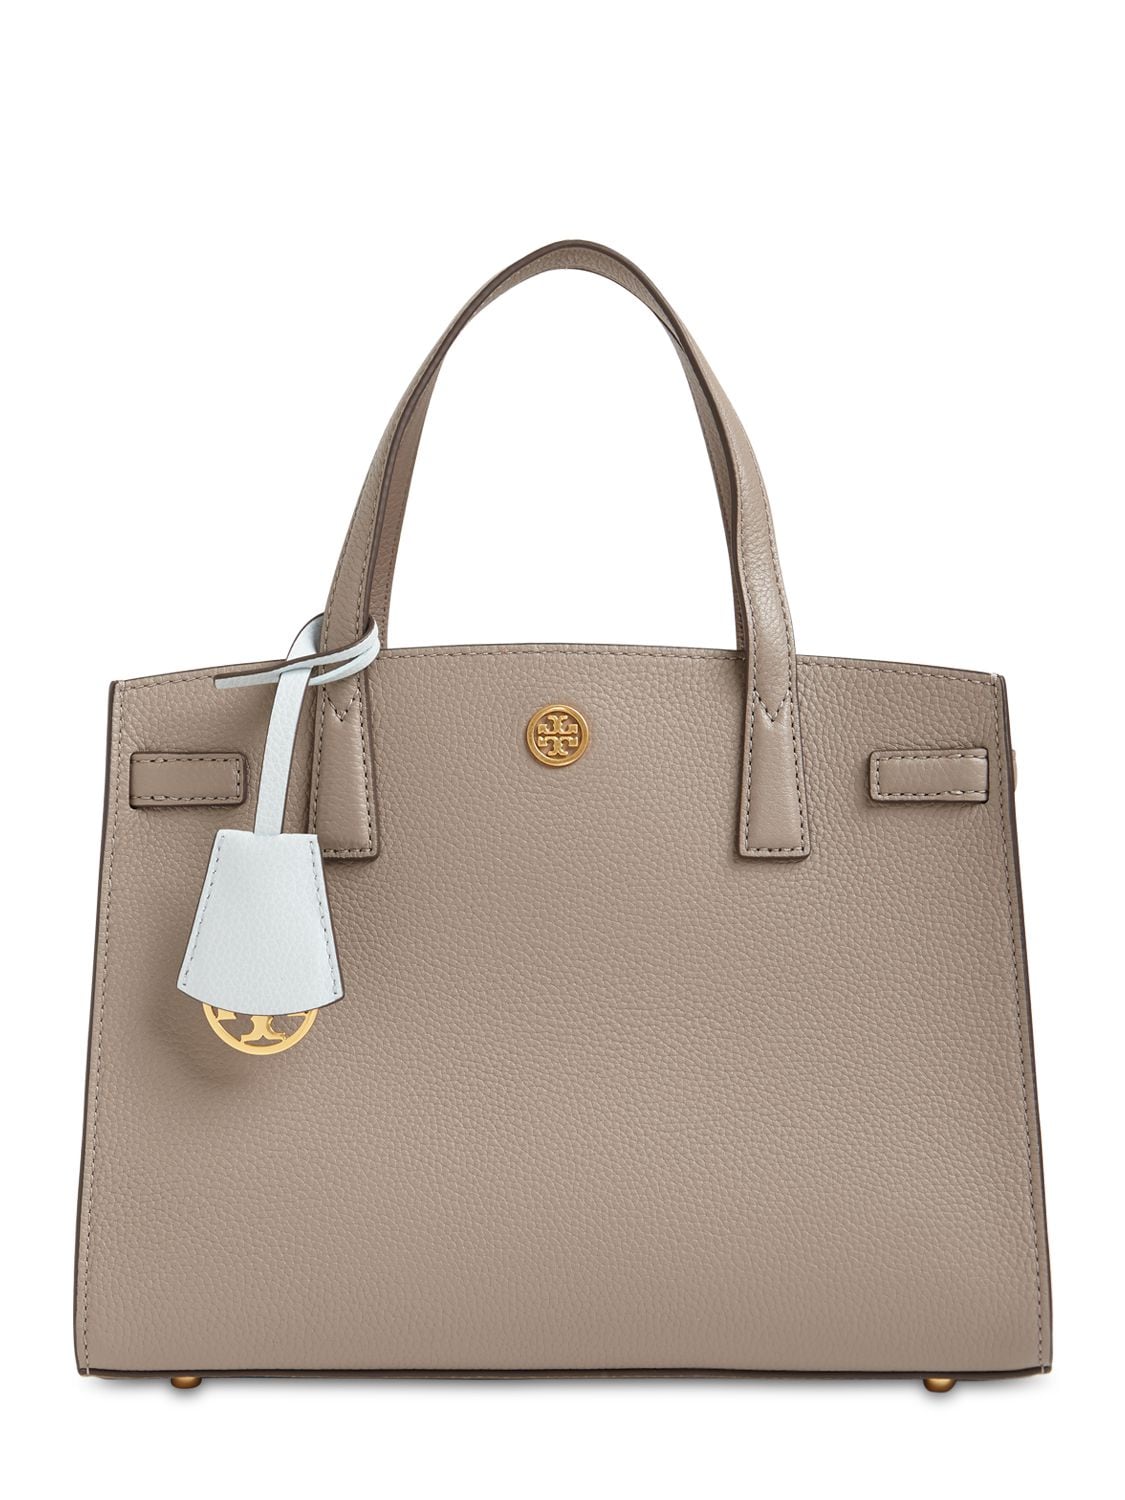 Tory Burch Walker Sm Grained Leather Bag In Grey Eron | ModeSens